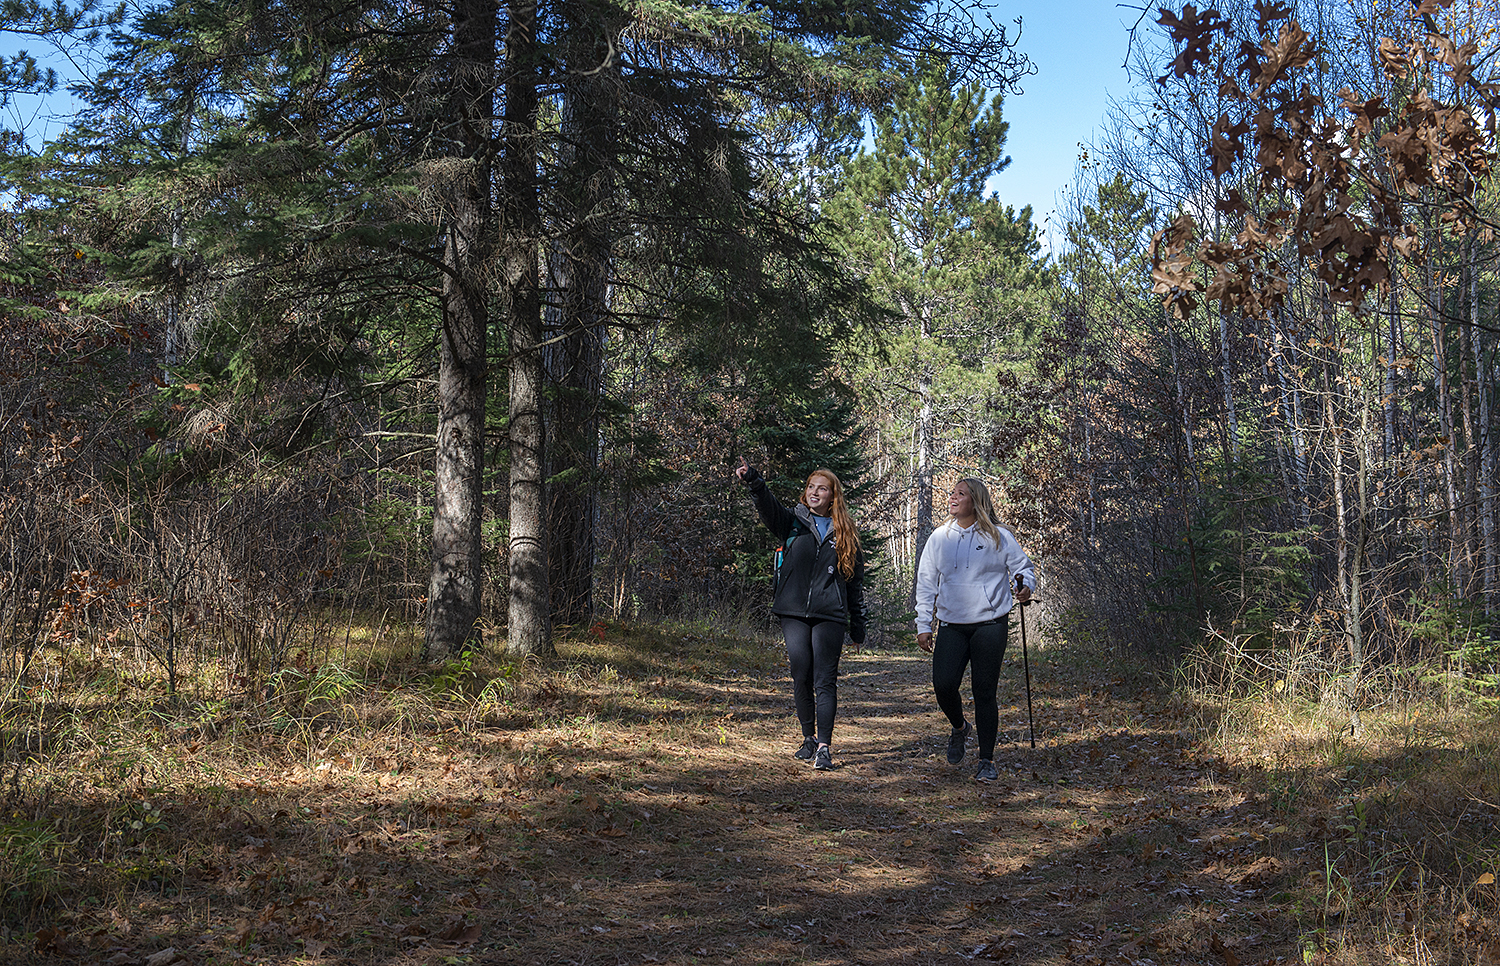 Bemidji State students explore the campus forst